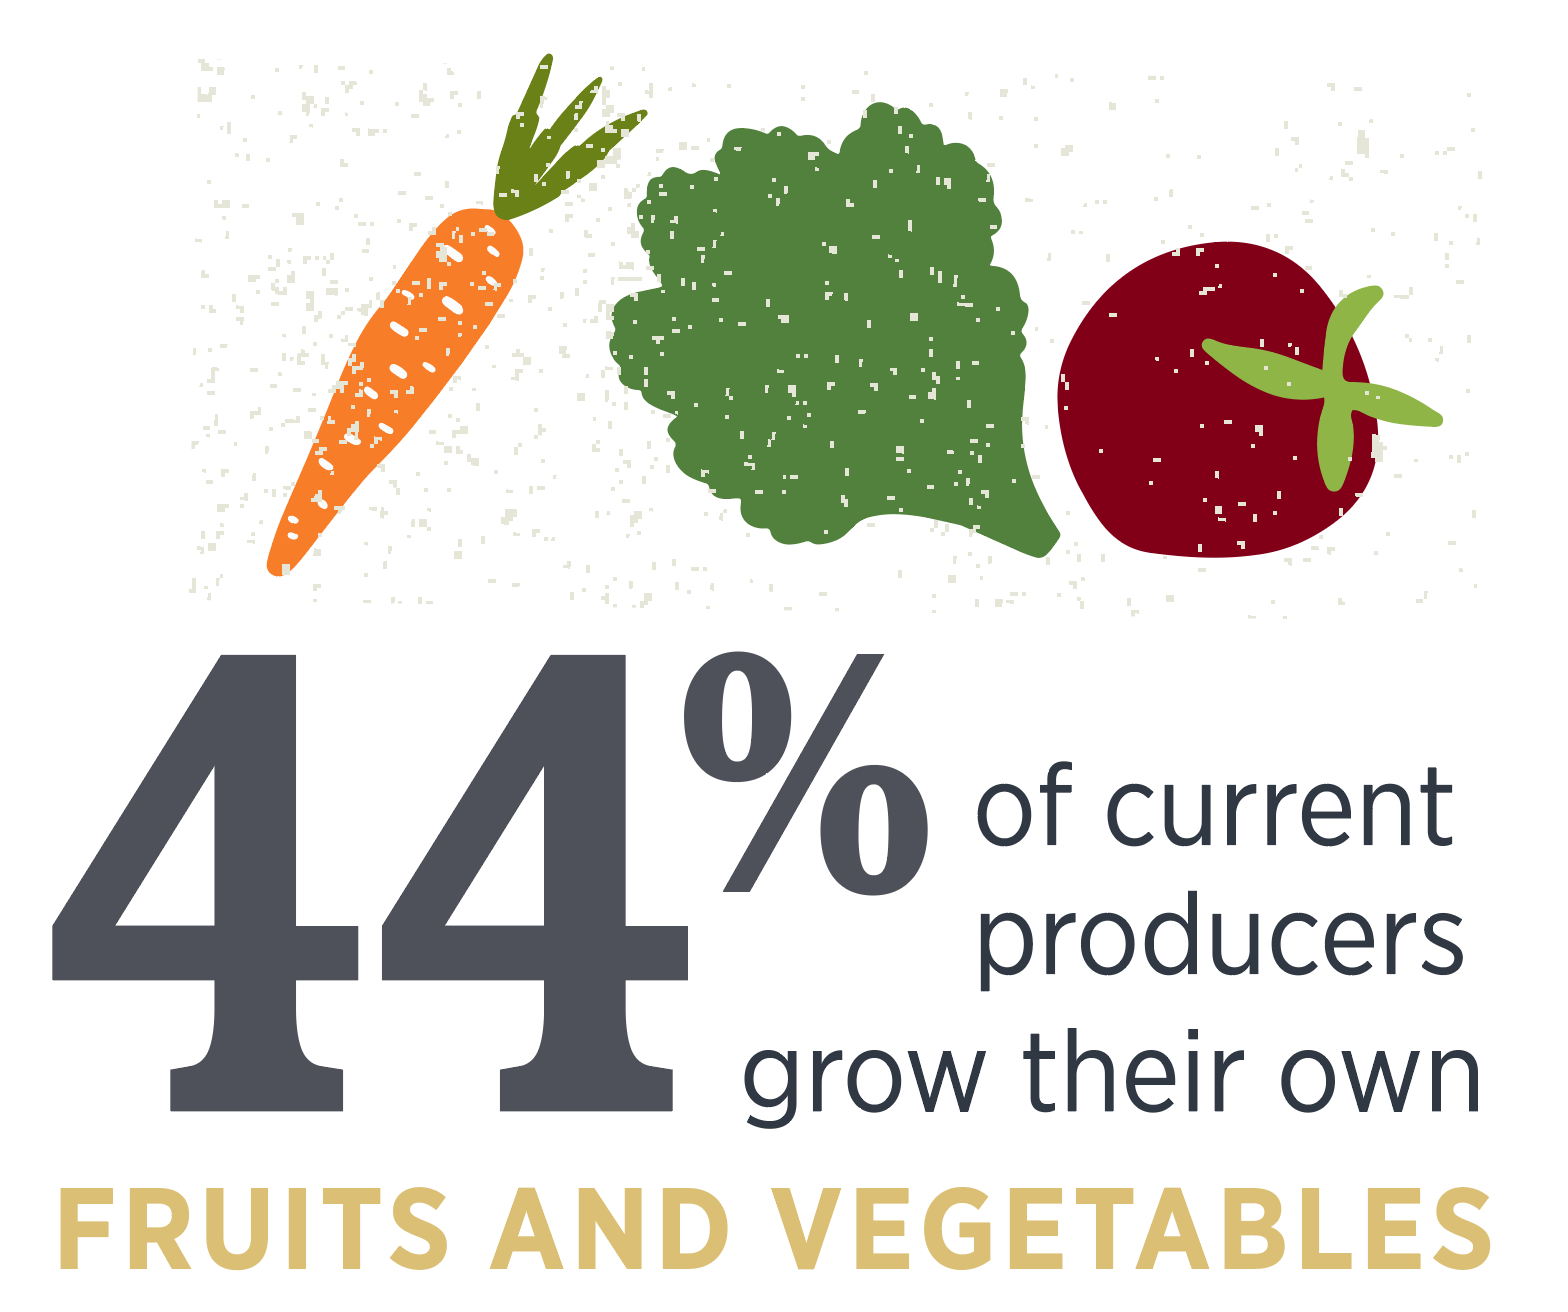 44% of current producers grow their own fruits and vegetables.